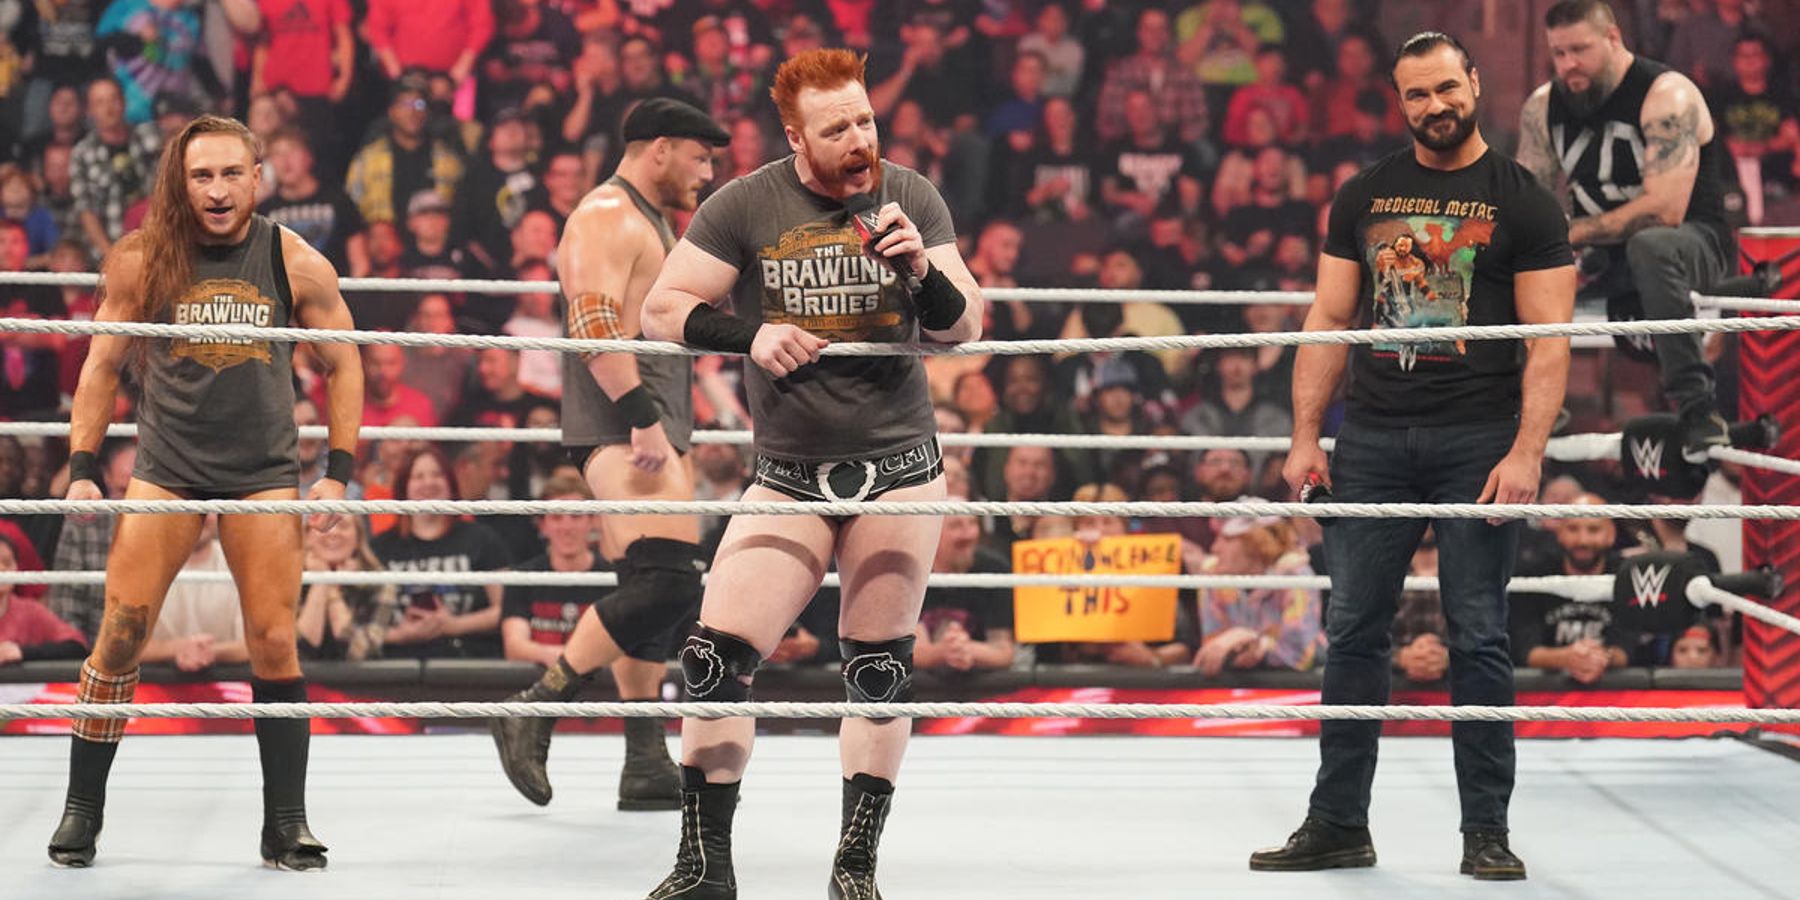 Sheamus whips up the WWE crowd alongside his War Games team ahead of Survivor Series.